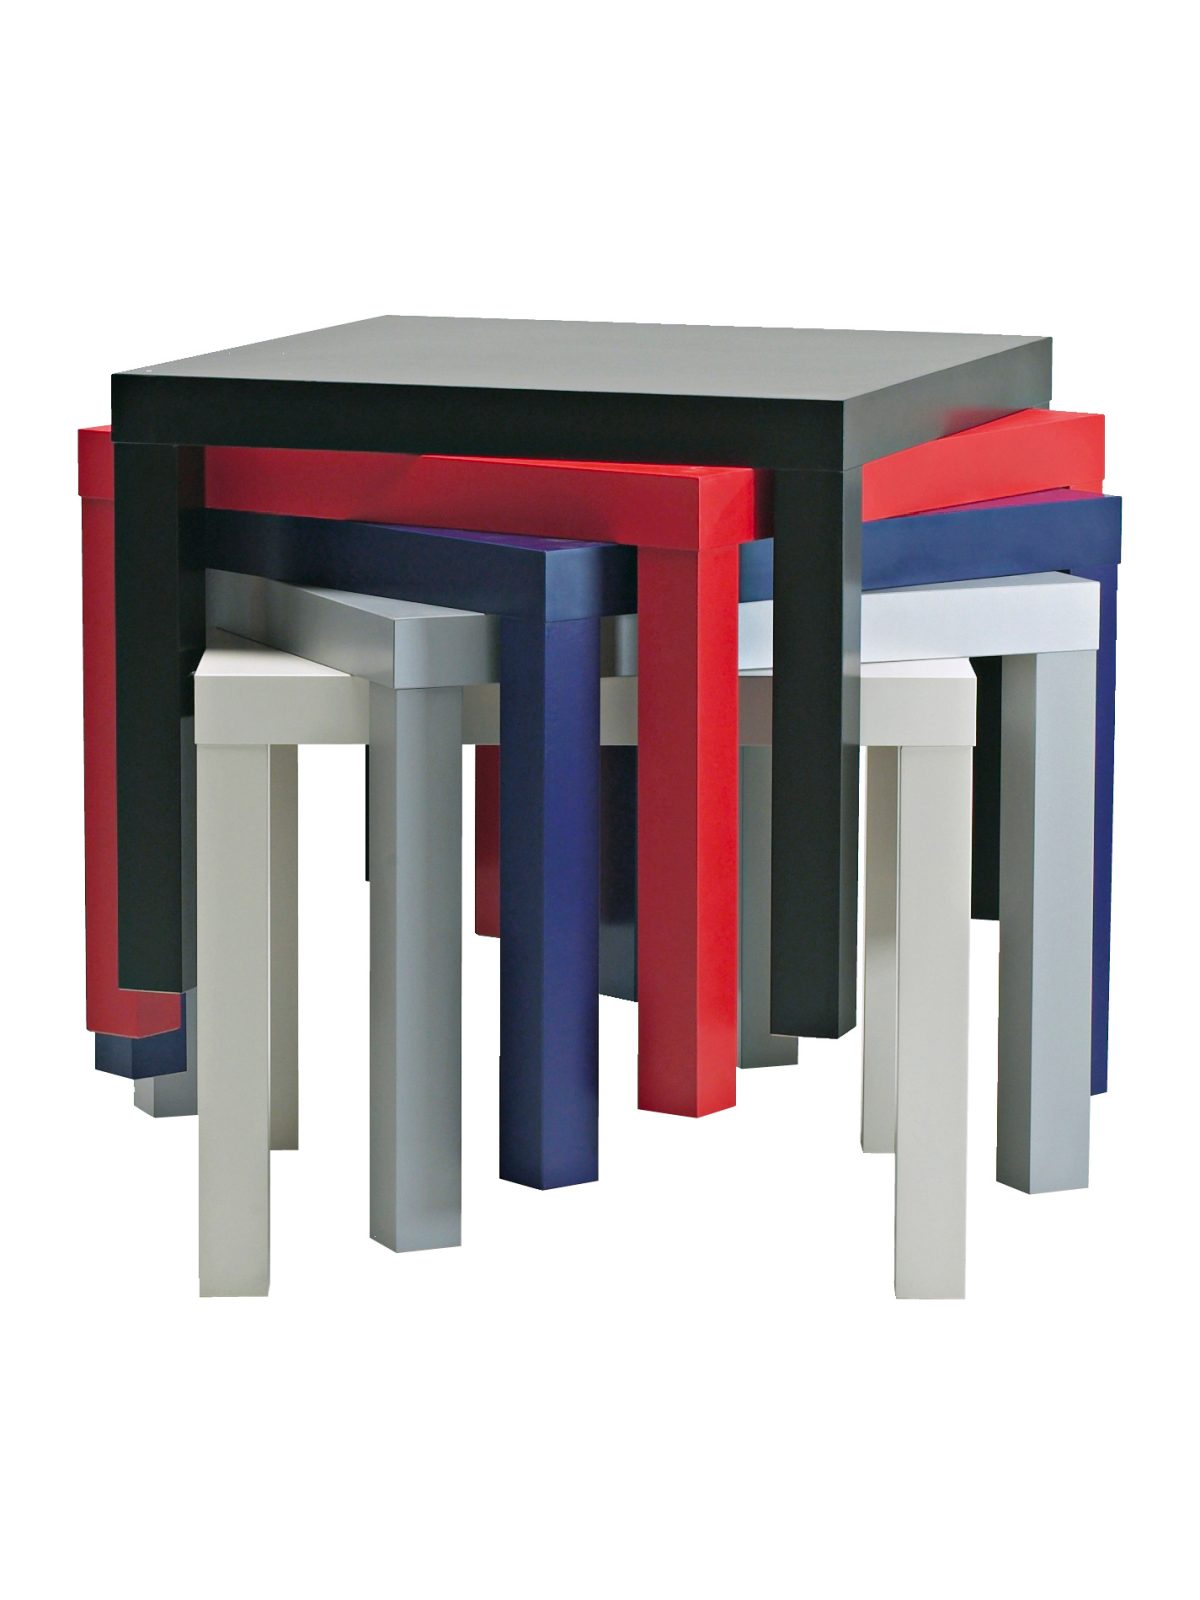 Stacked LACK square tables in various colours.